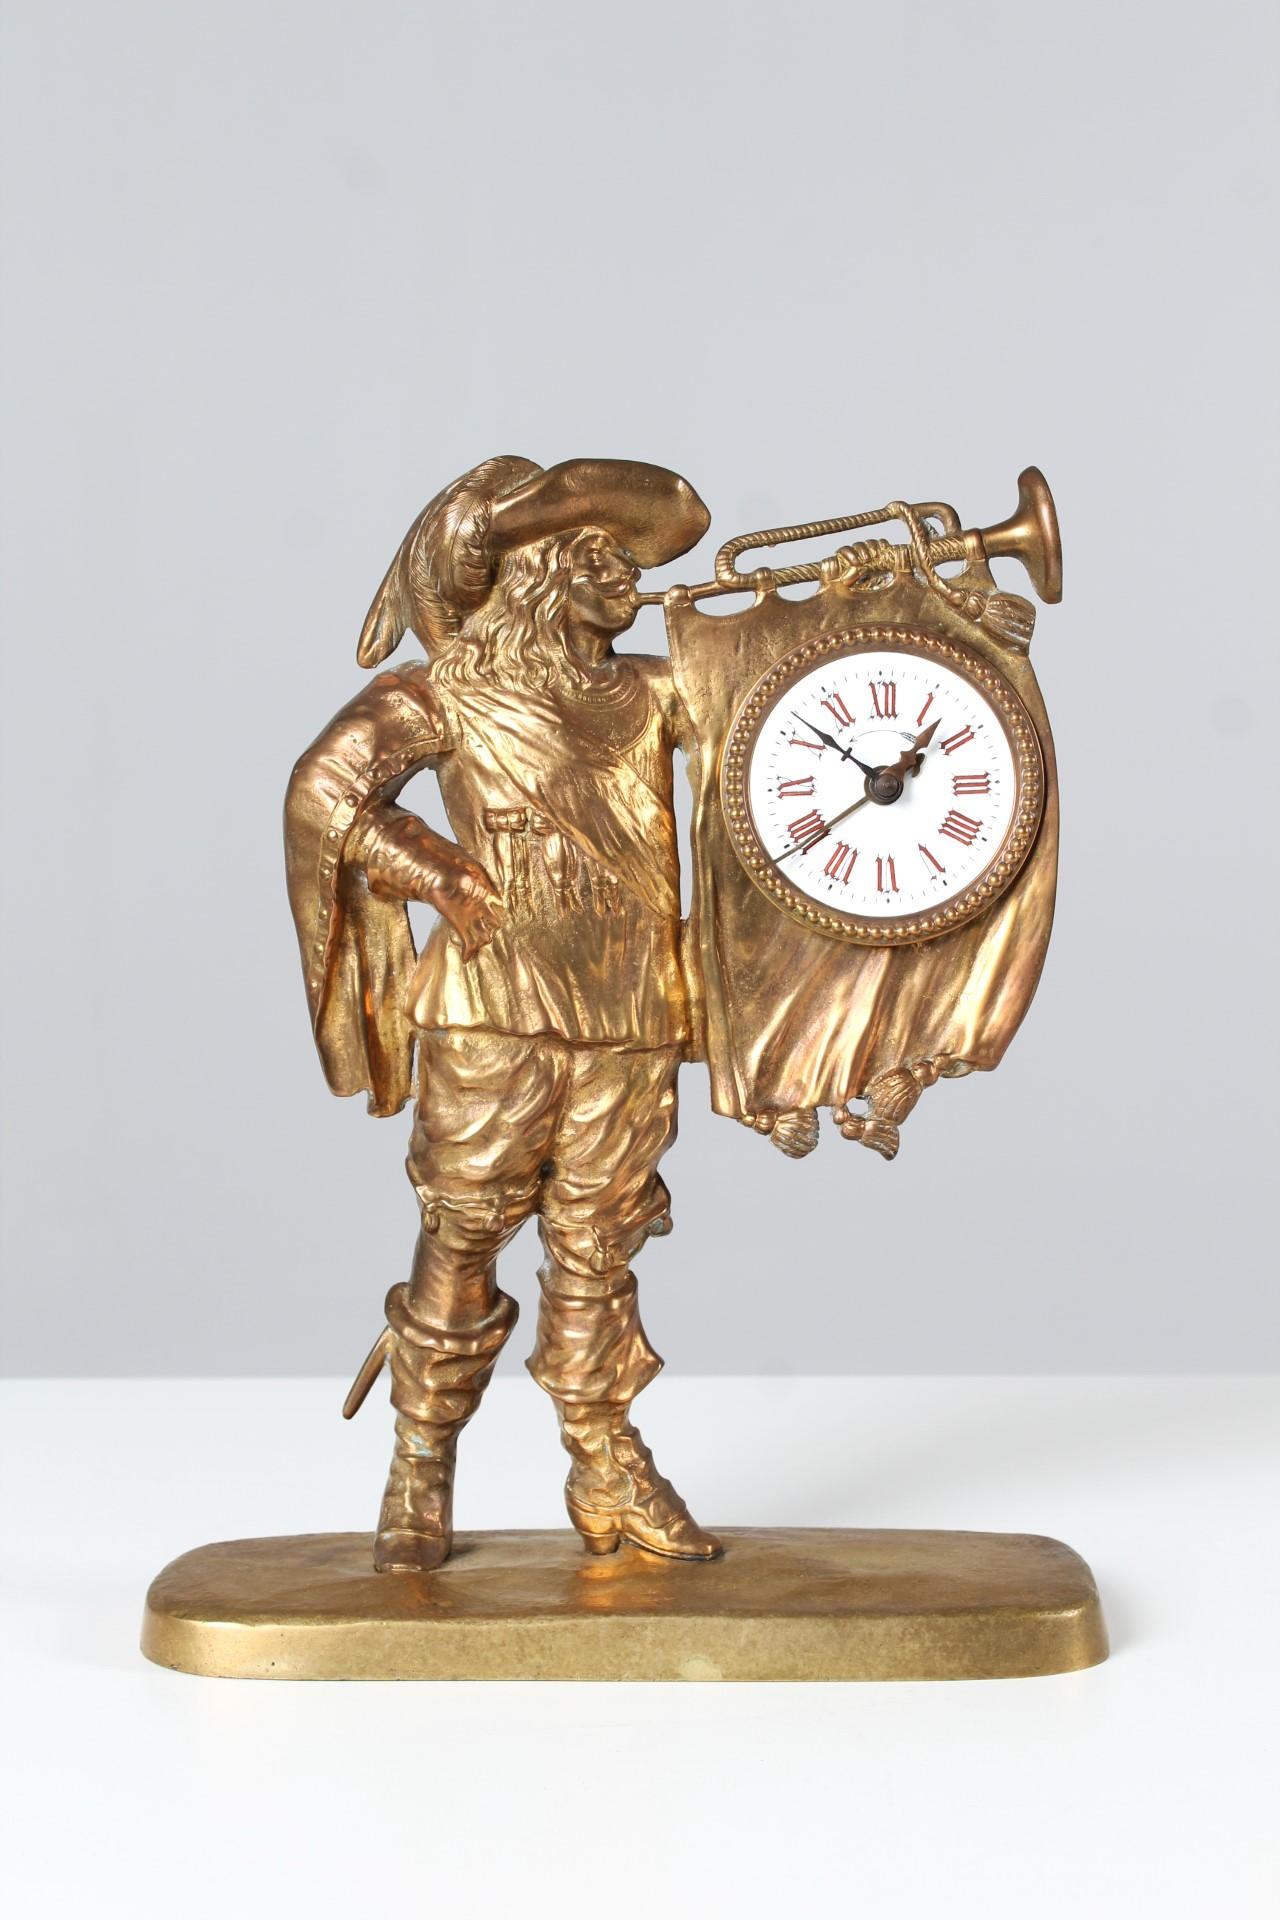 Antique French mantel clock. Probably made around 1900.
As a bas-relief cast bronze figure as a support for the movement.
Movement with alarm function. Short pendulum.
Beautiful, cleaned bronze condition. The movement is unrestored and needs to